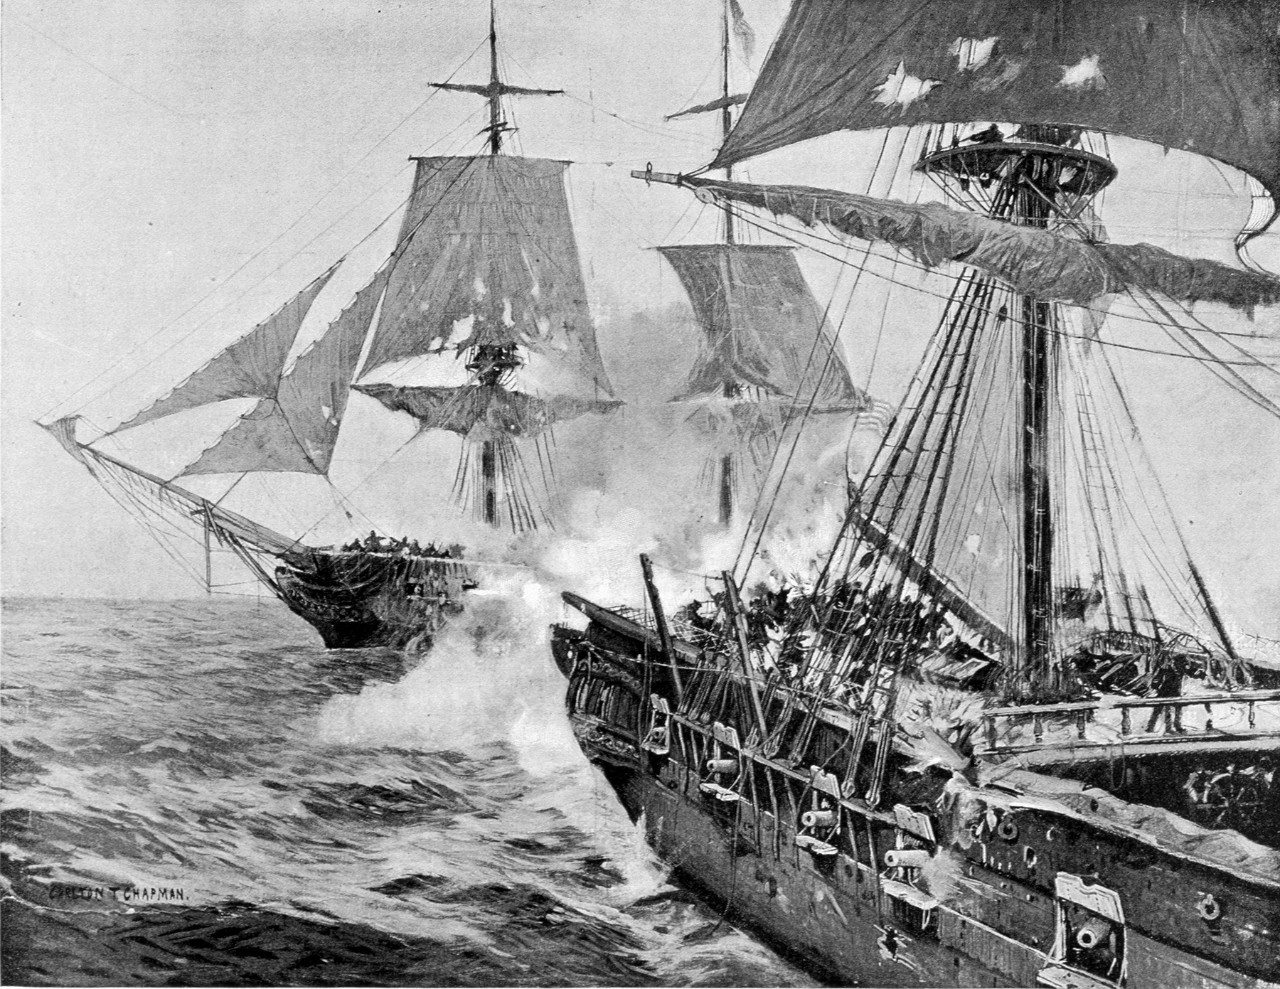 A sailing ship firing guns from its bow into another ship directly in front